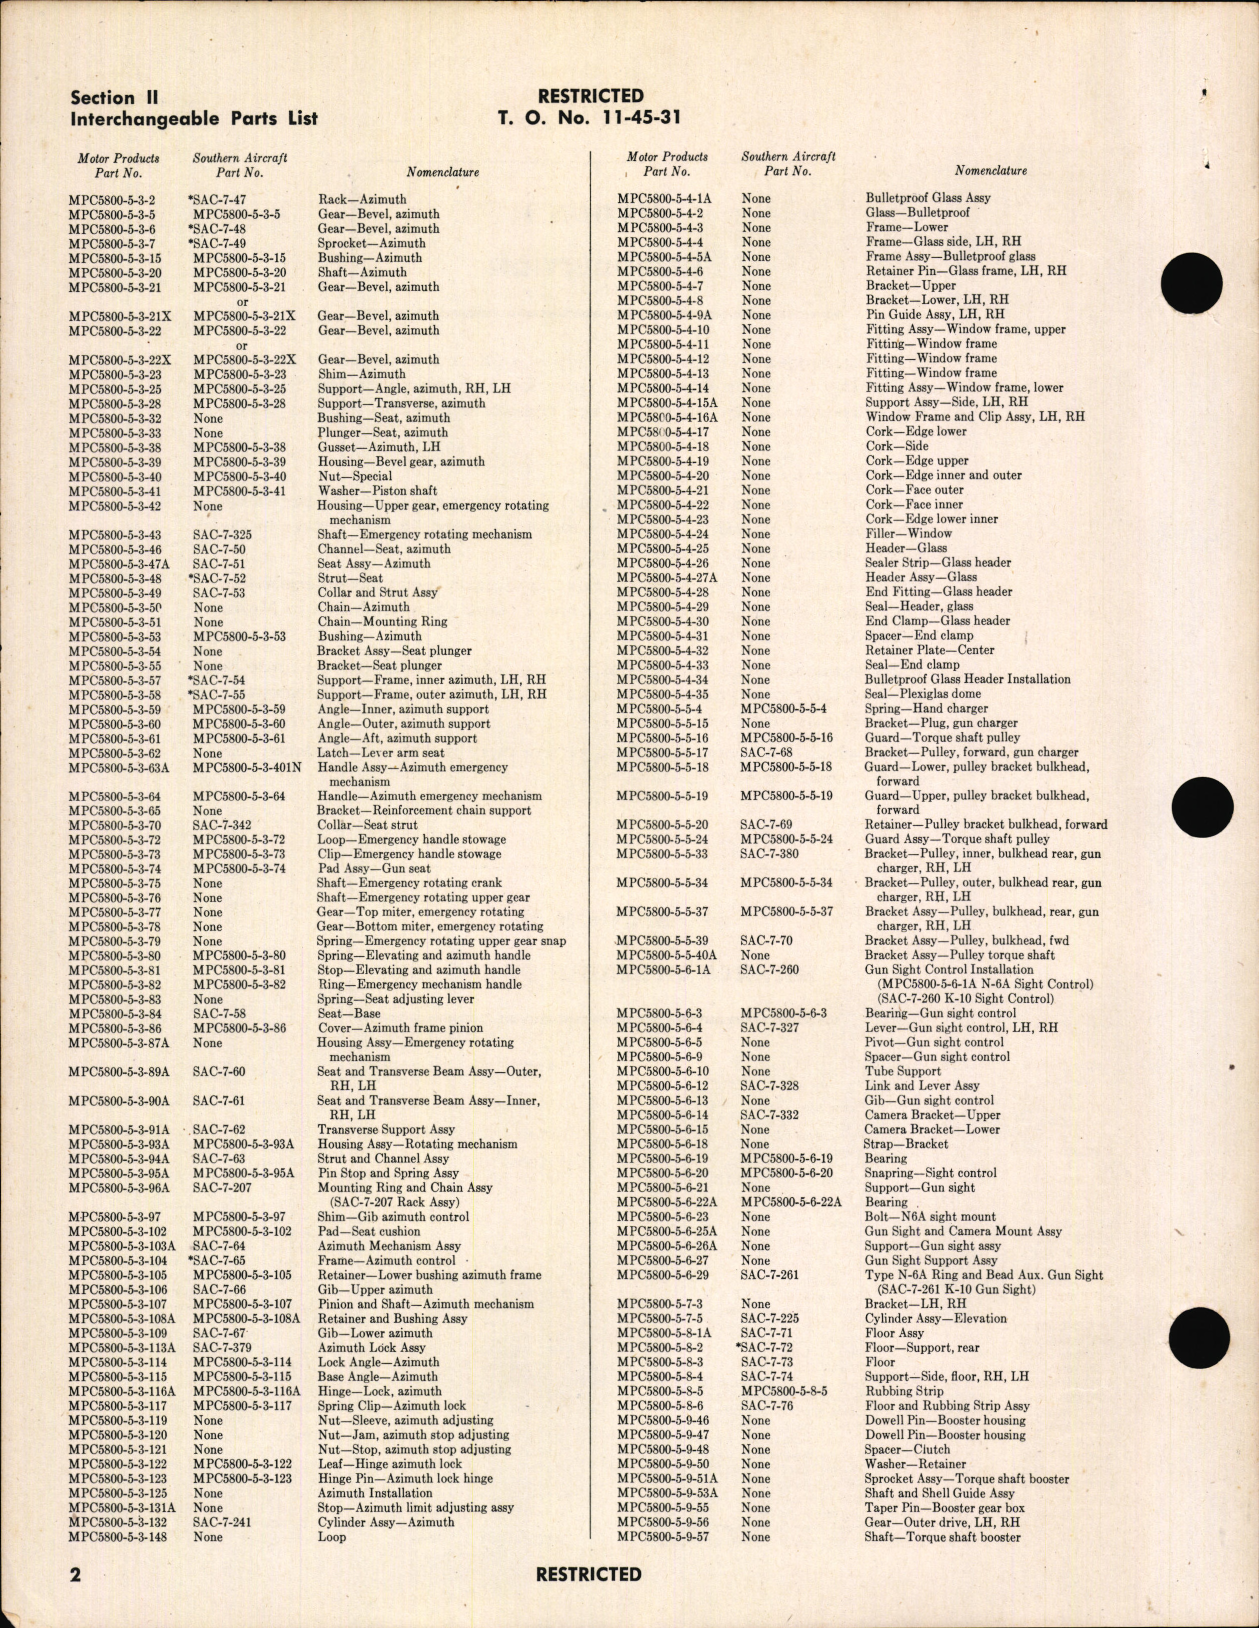 Sample page 4 from AirCorps Library document: Interchangeable Parts List for Type A-6B and A-6C Turrets